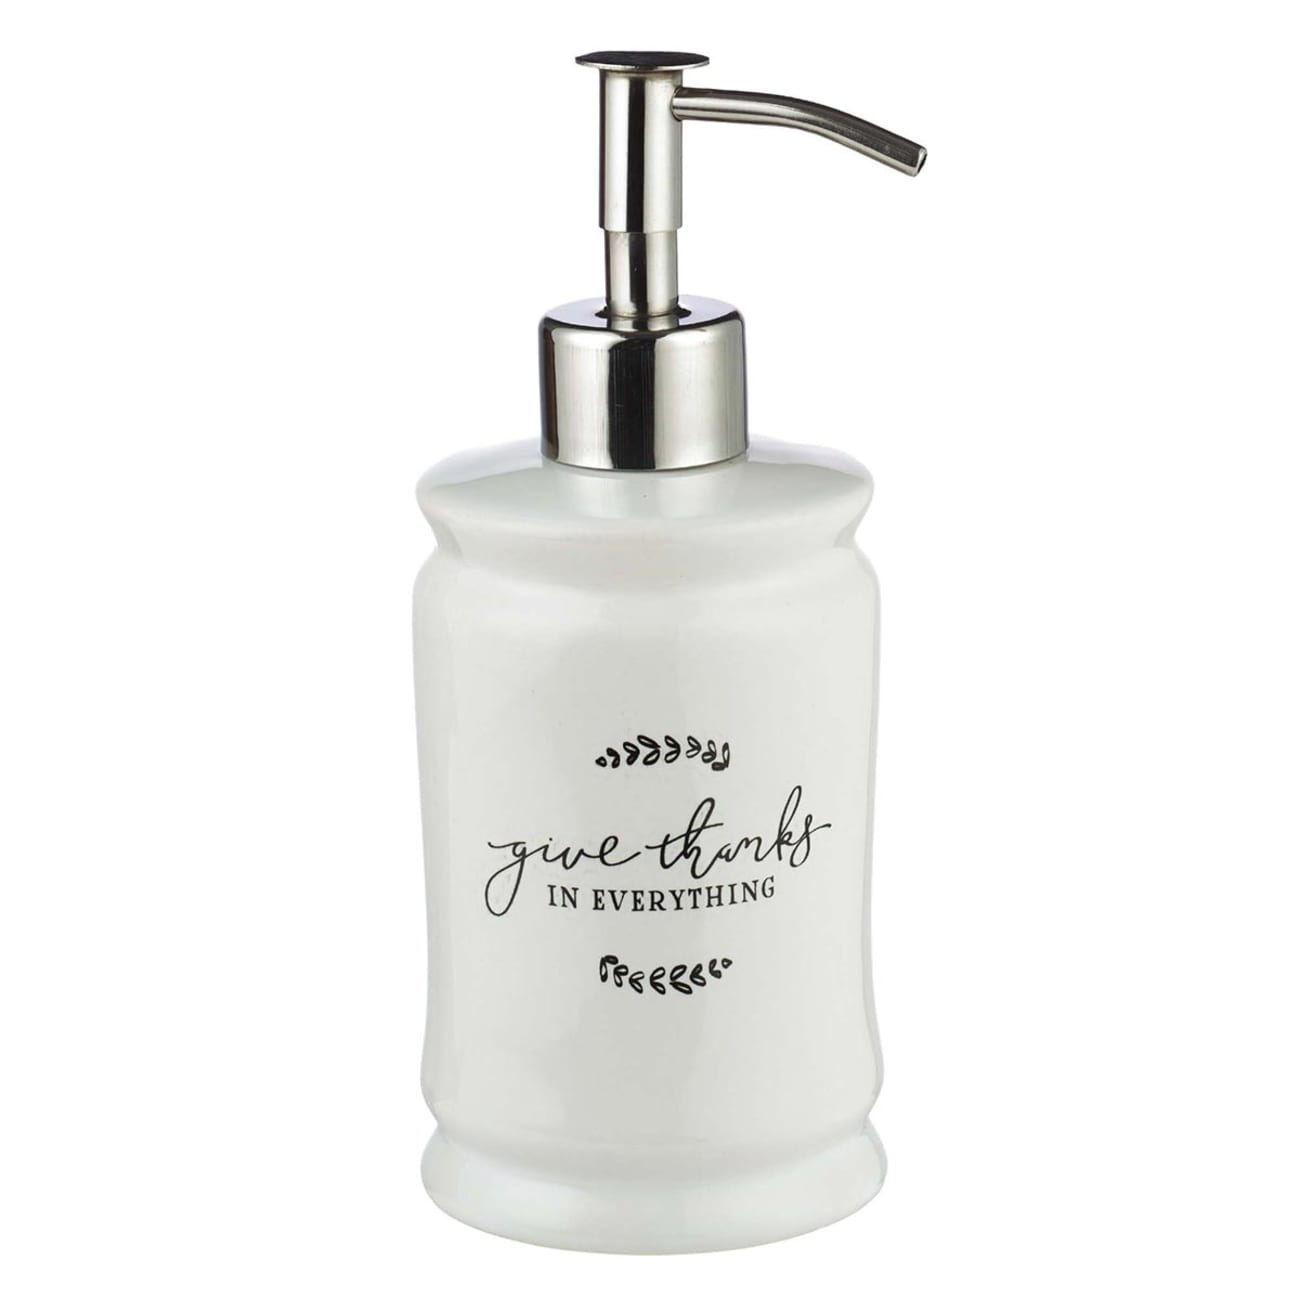 Ceramic Soap Dispenser: Give Thanks Stainless Steel Pump (1 Thess 5:18) (Give Thanks Collection) Homeware